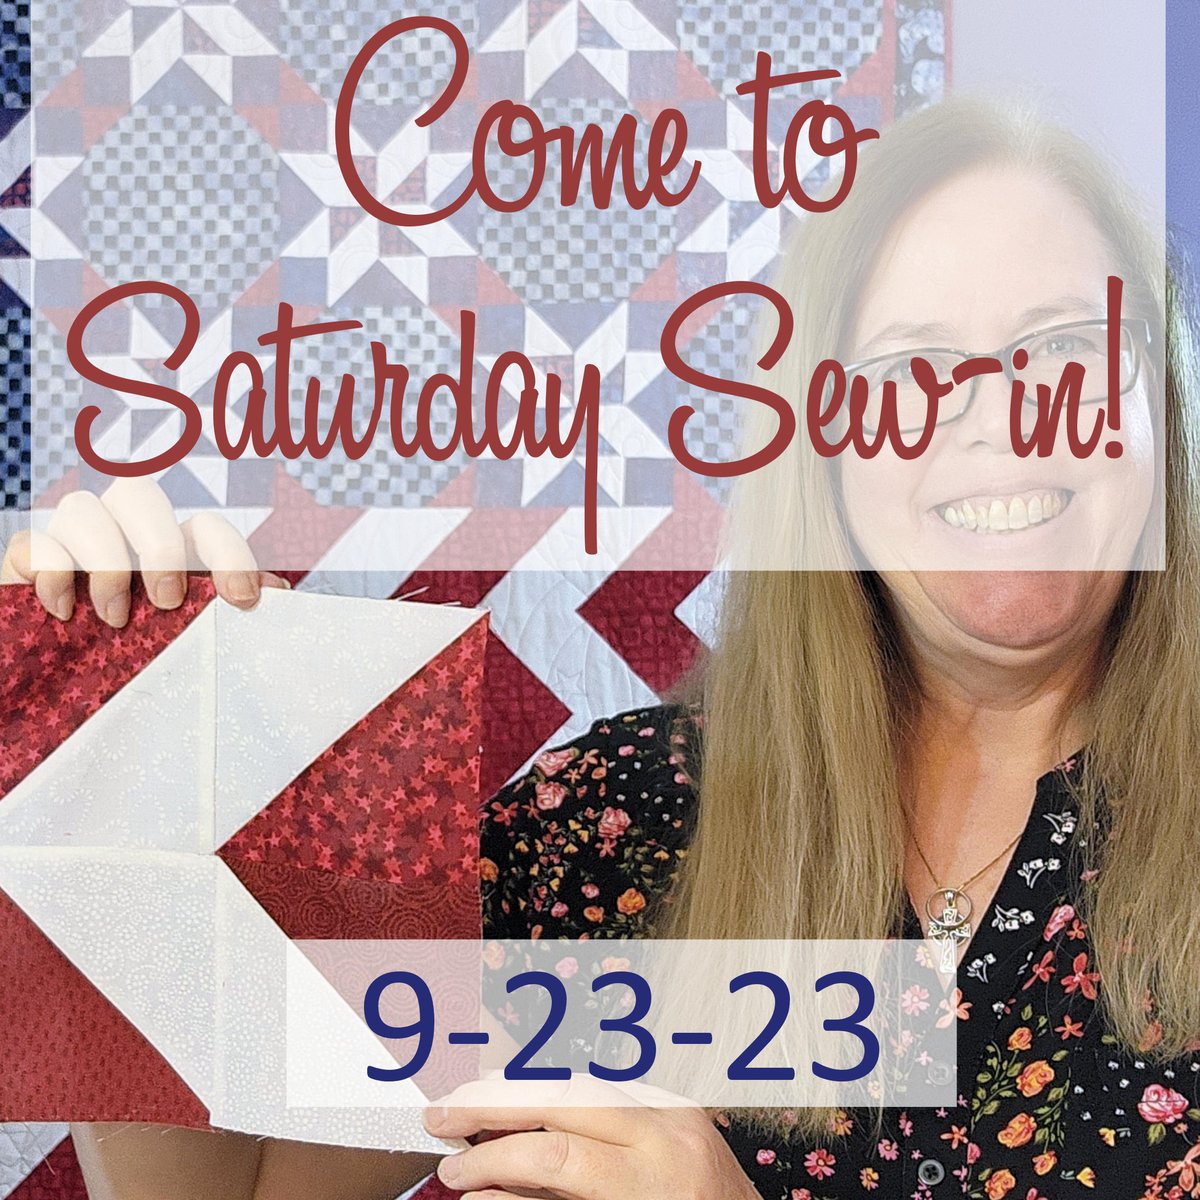 What are you working on? Today I'm recording some videos for an upcoming quilt class. ow.ly/oBye50z3dEy #inquiringquilter #saturdaysewin #saturdaysewing